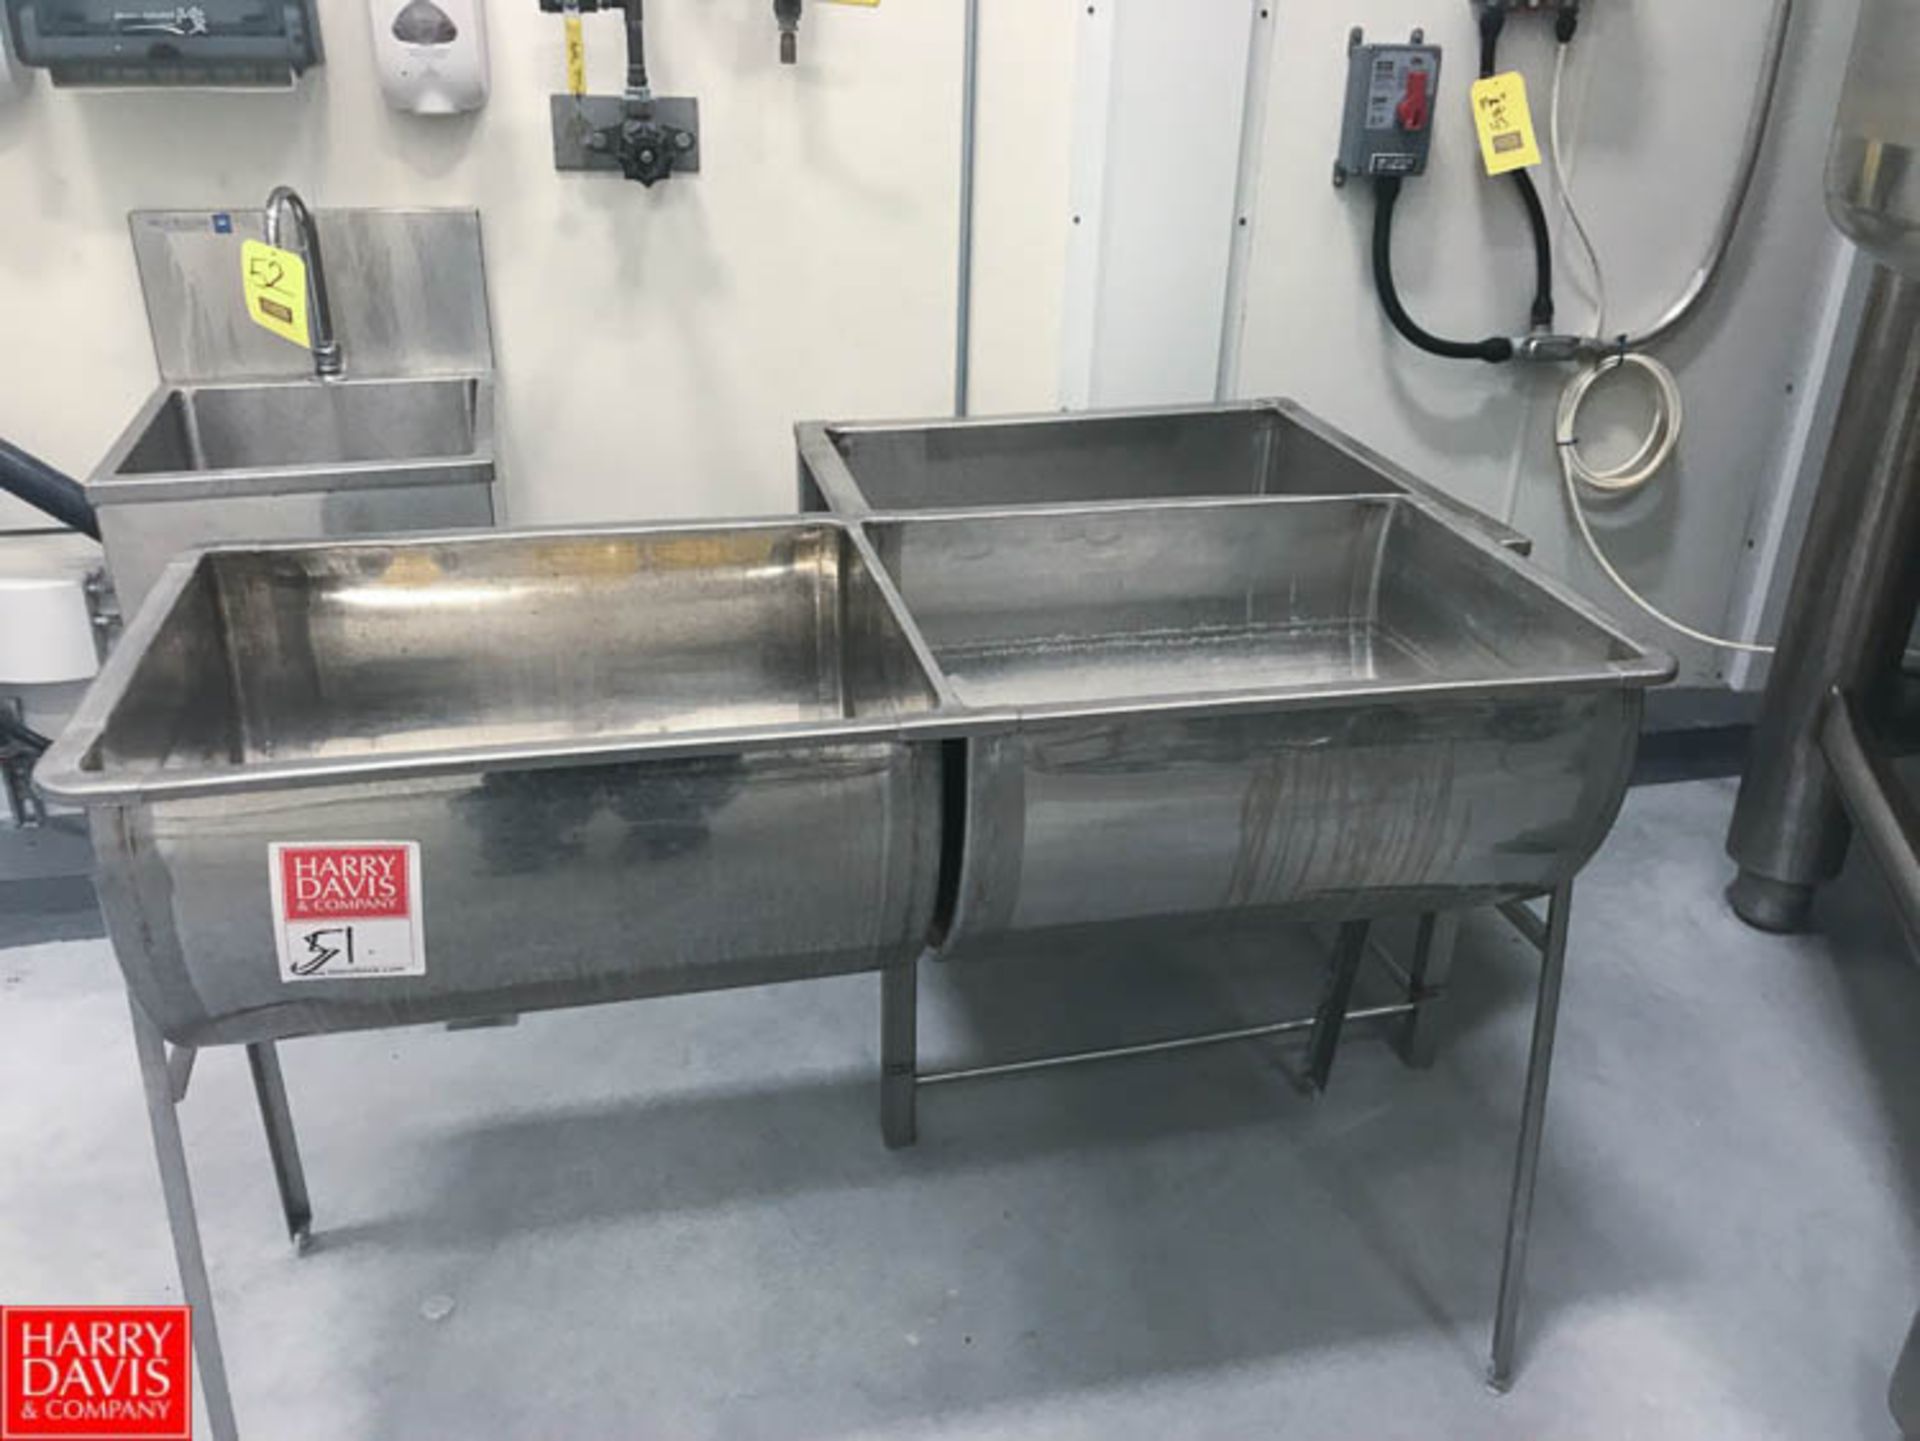 S/S Wash Troughs Rigging Fee: $ 100